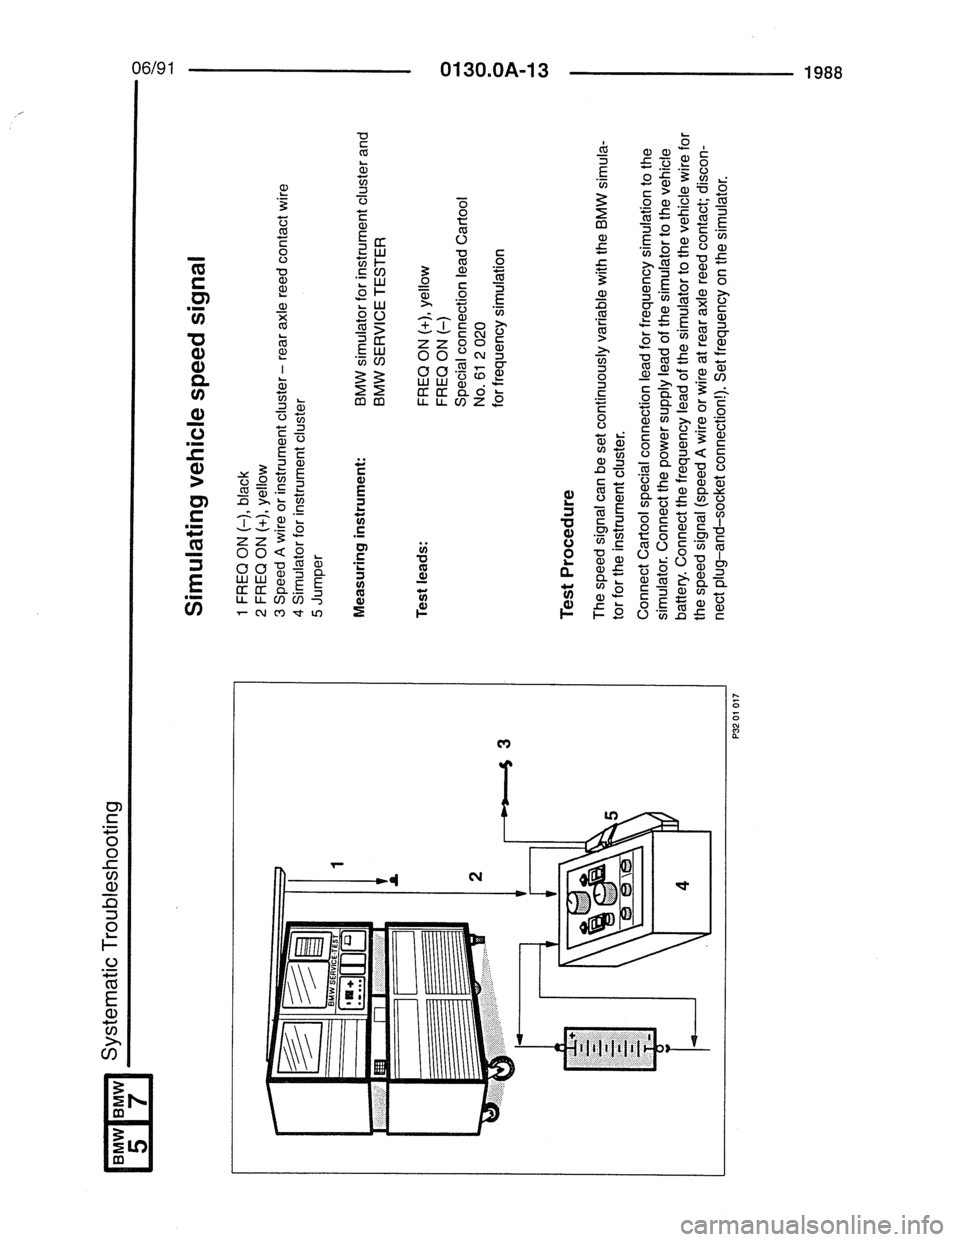 BMW 5 SERIES 1988 E34 Electrical Troubleshooting Manual 